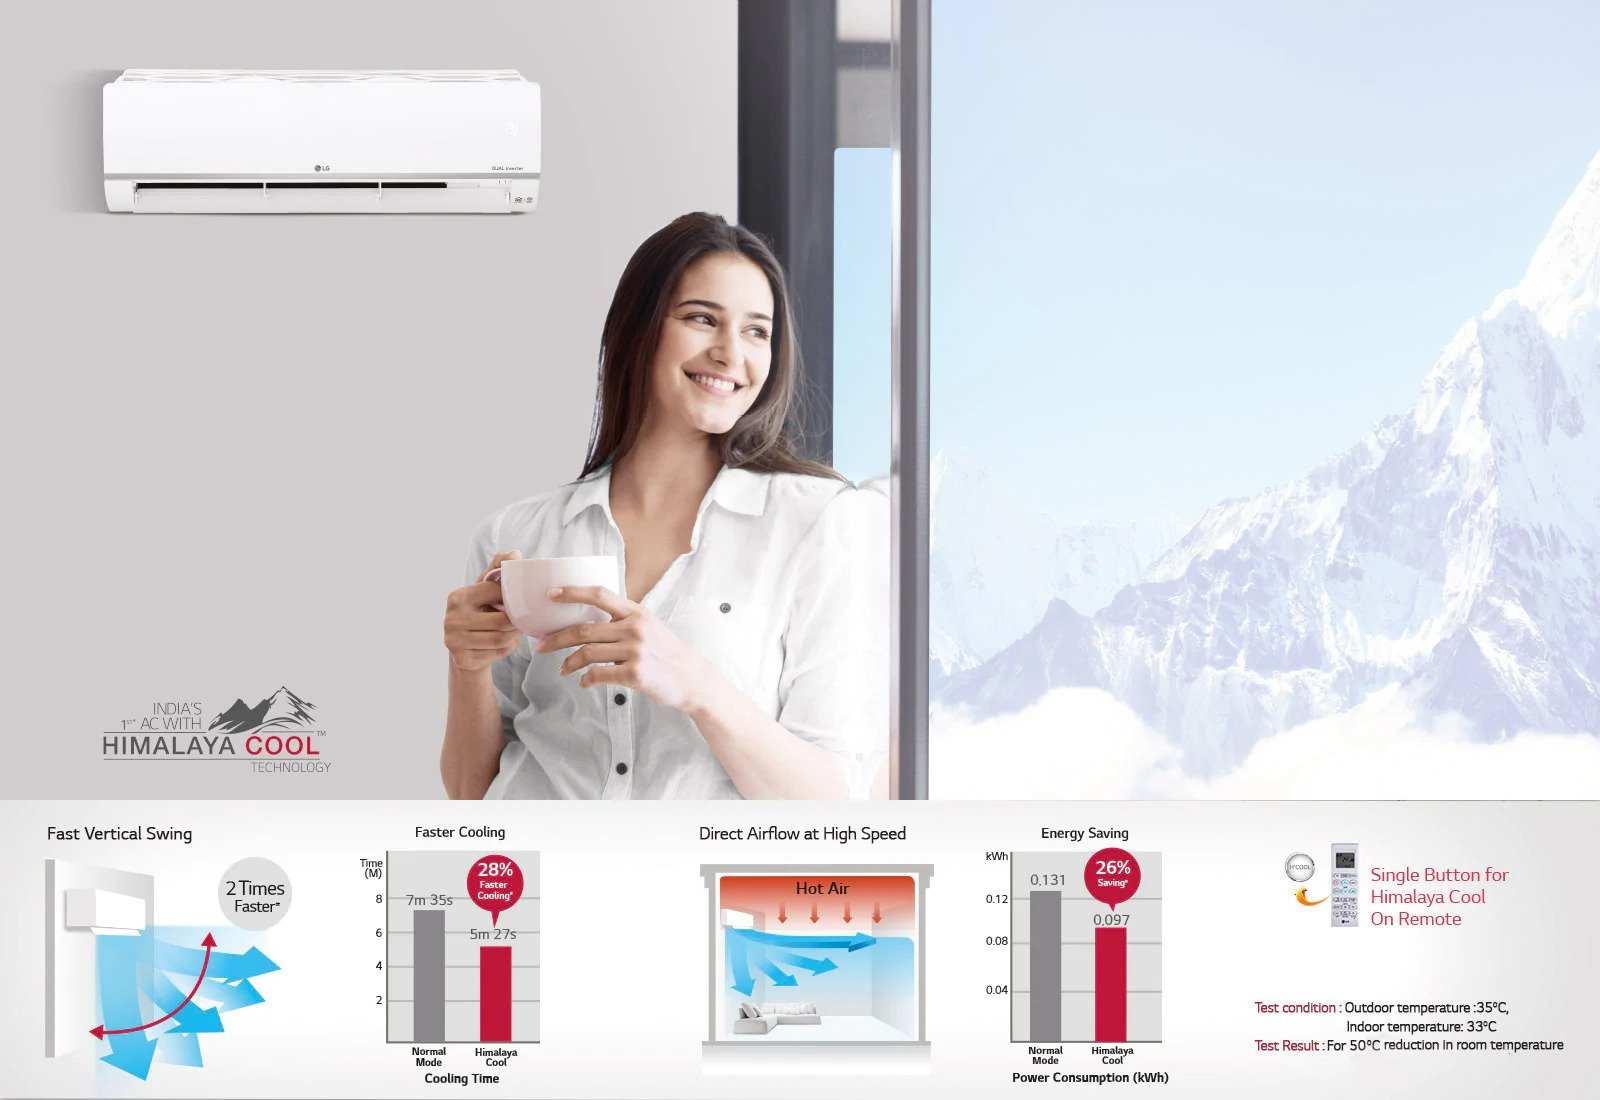 LG MS-Q18RNZA Dual Inverter 5 Star Split Air Conditioner · Model Name/Number: LS-Q18KNZA · Compressor Type: Dual Rotary/R-32.